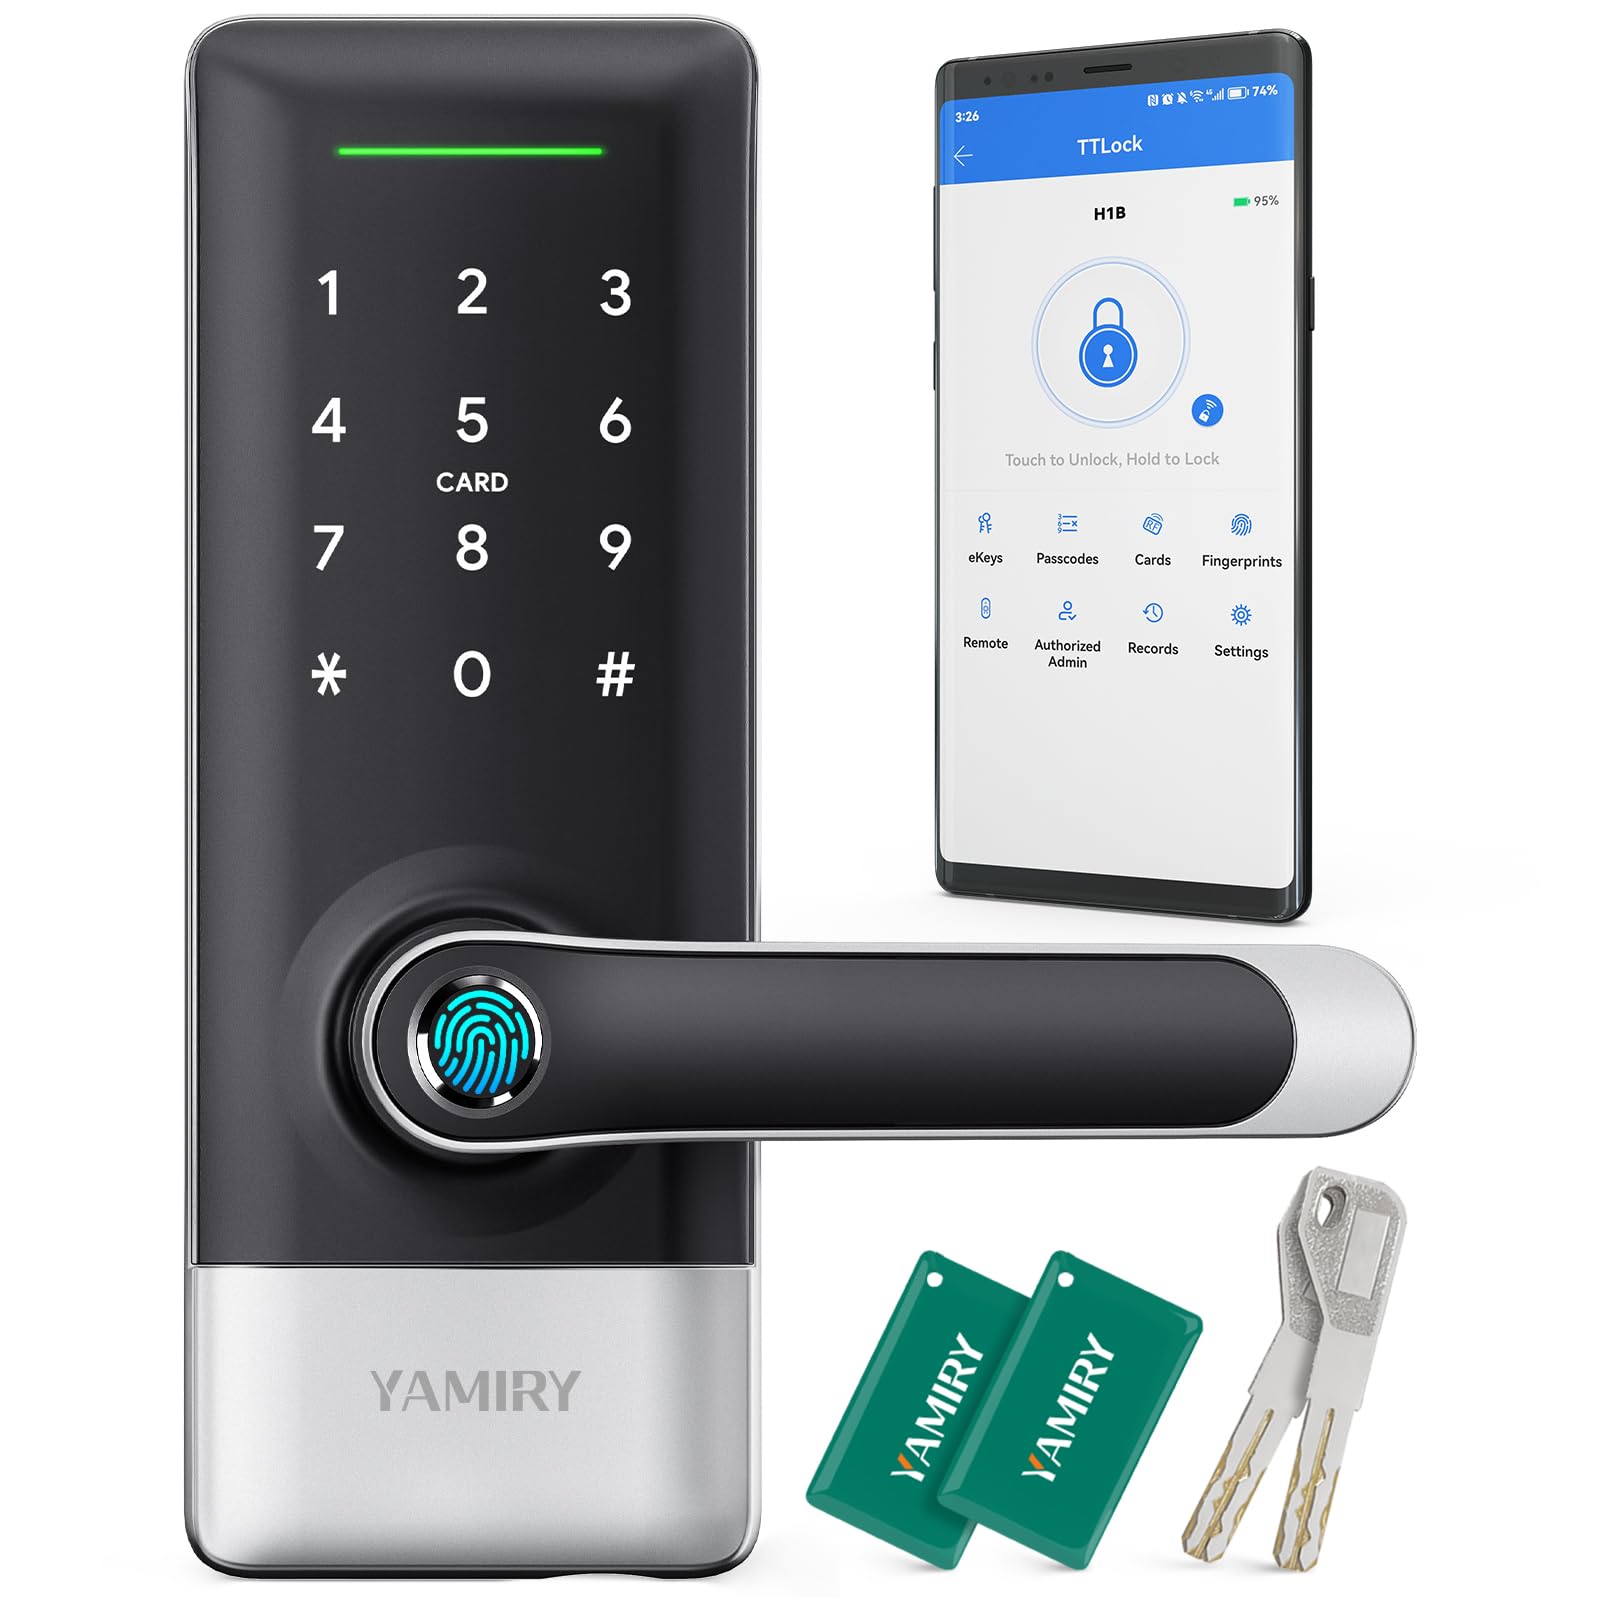 What Are the Disadvantages of Smart Locks?